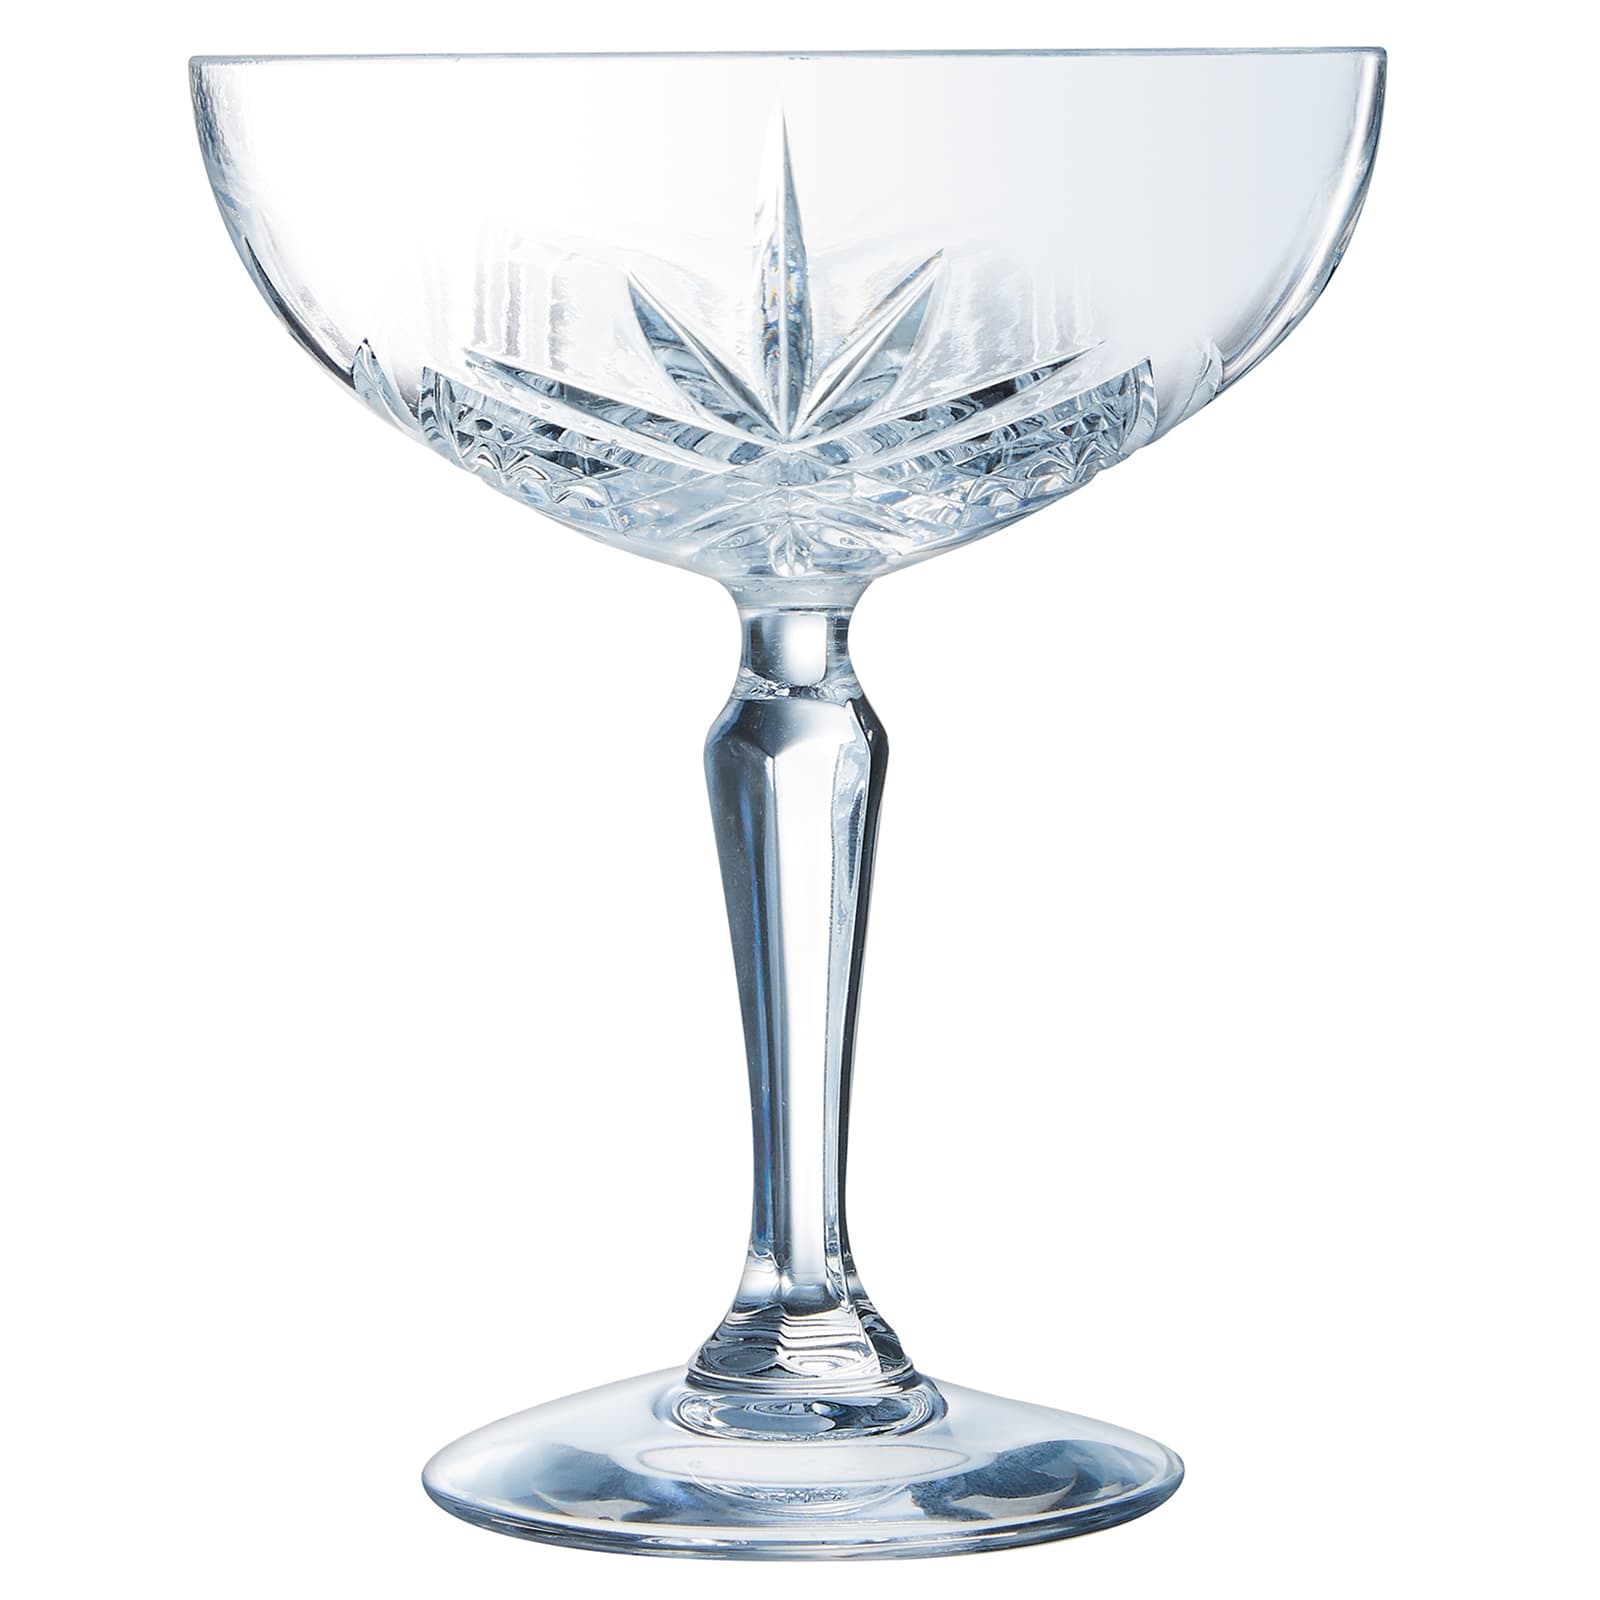 Coupe Cocktail 5.5-Oz. Glass + Reviews